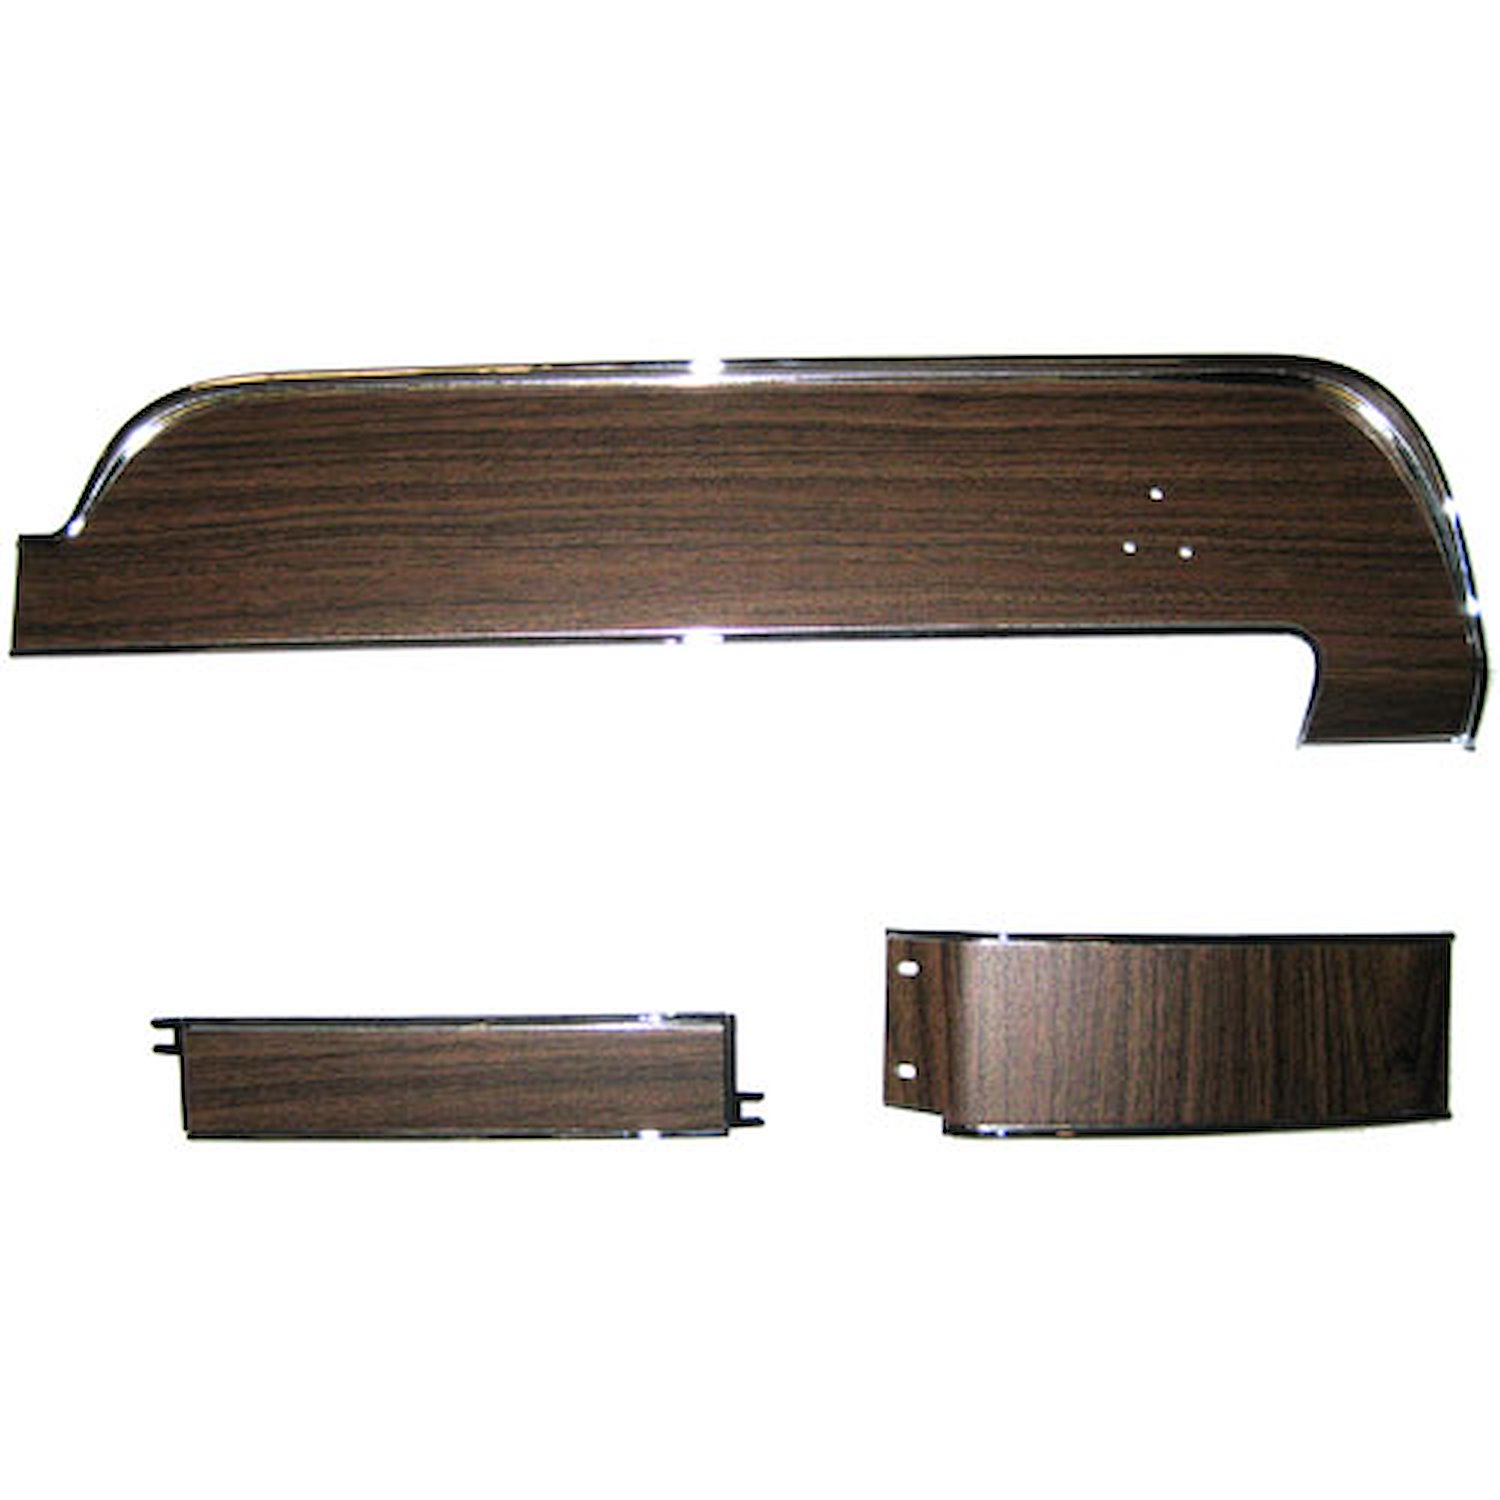 DP20-675S Dash Panel Trim Set 1968 Ford Mustang With Metal Backed Woodgrain Inserts